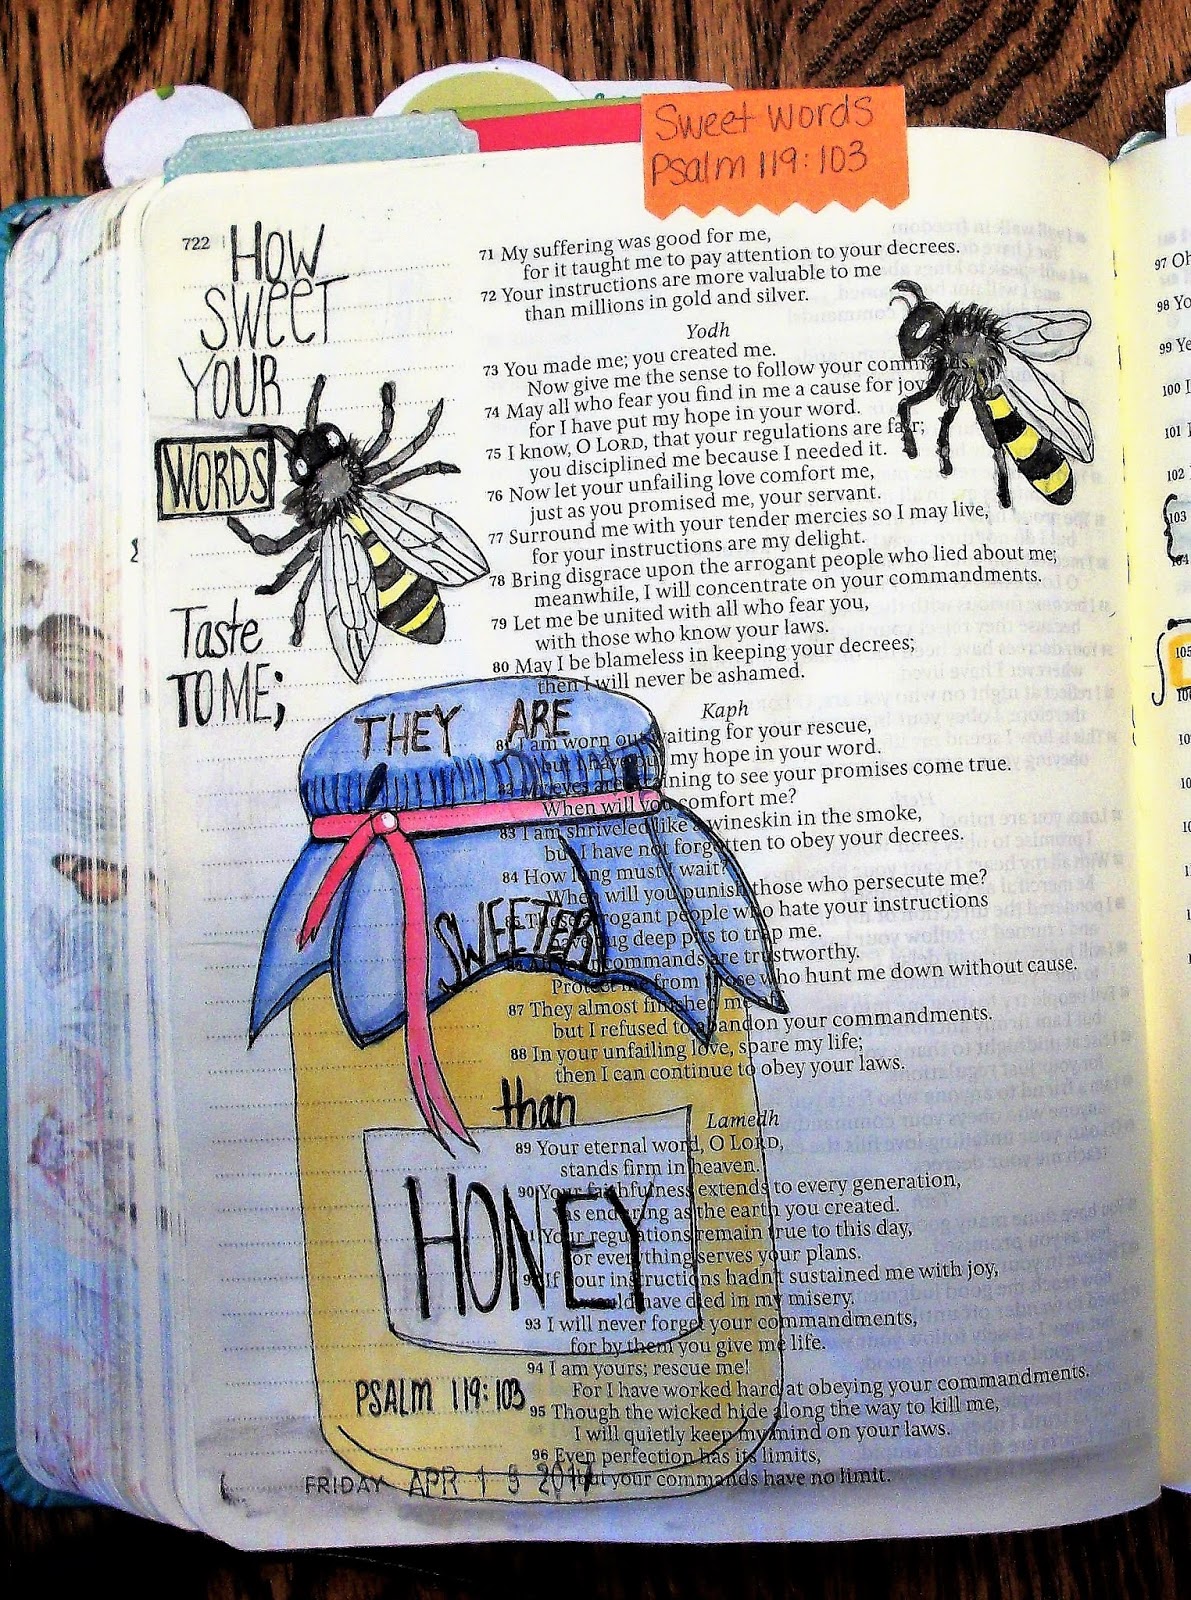 For the Love of Cardmaking: Bible Art using Psalm 119:103